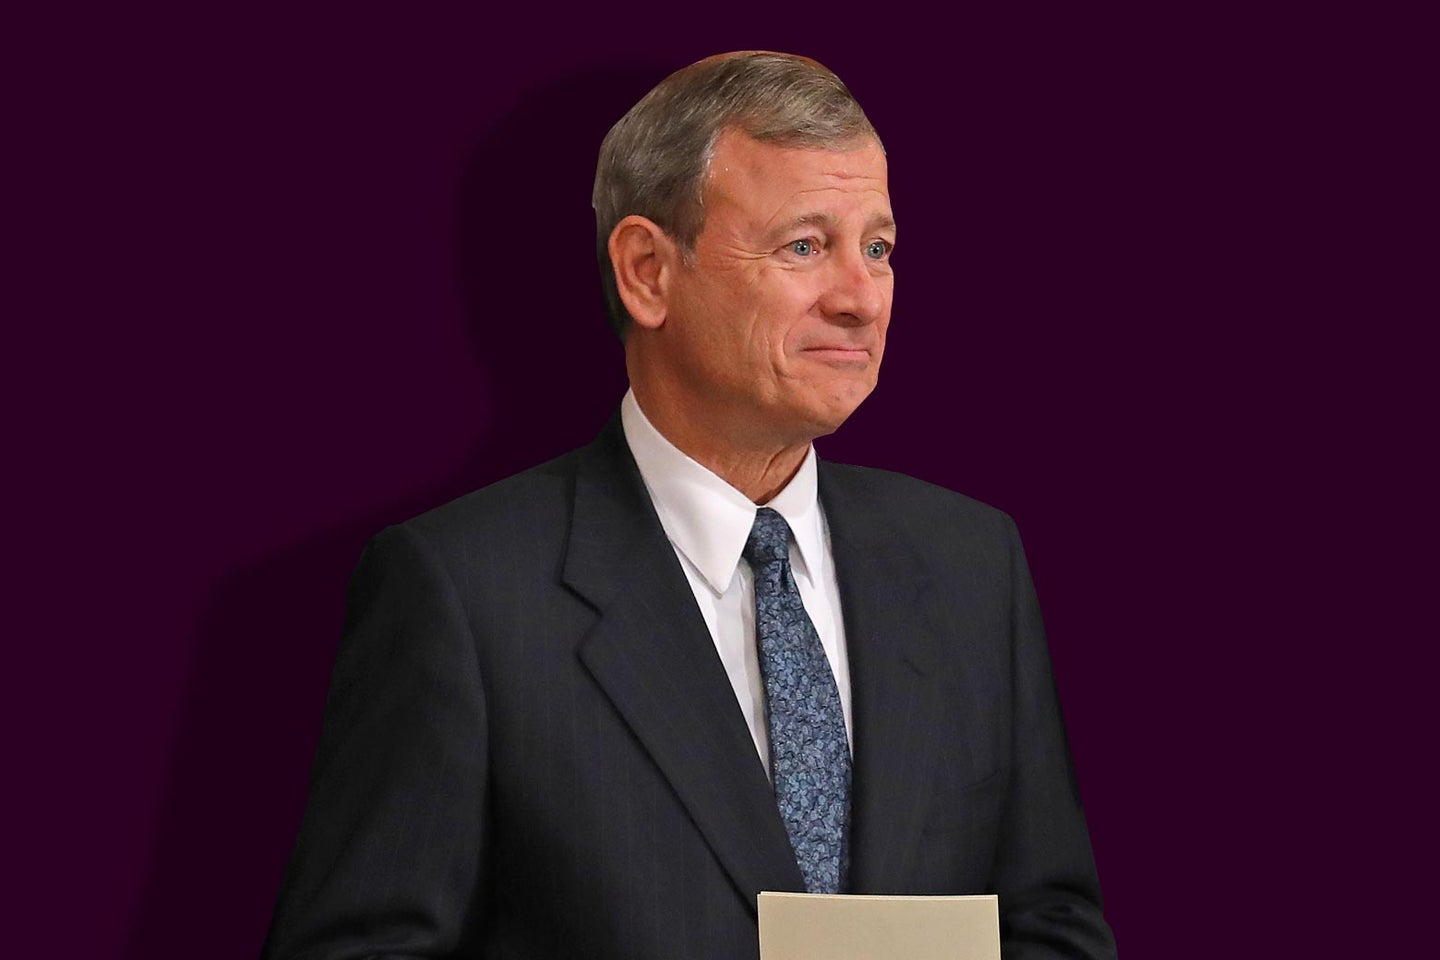 The census case will define the Roberts court